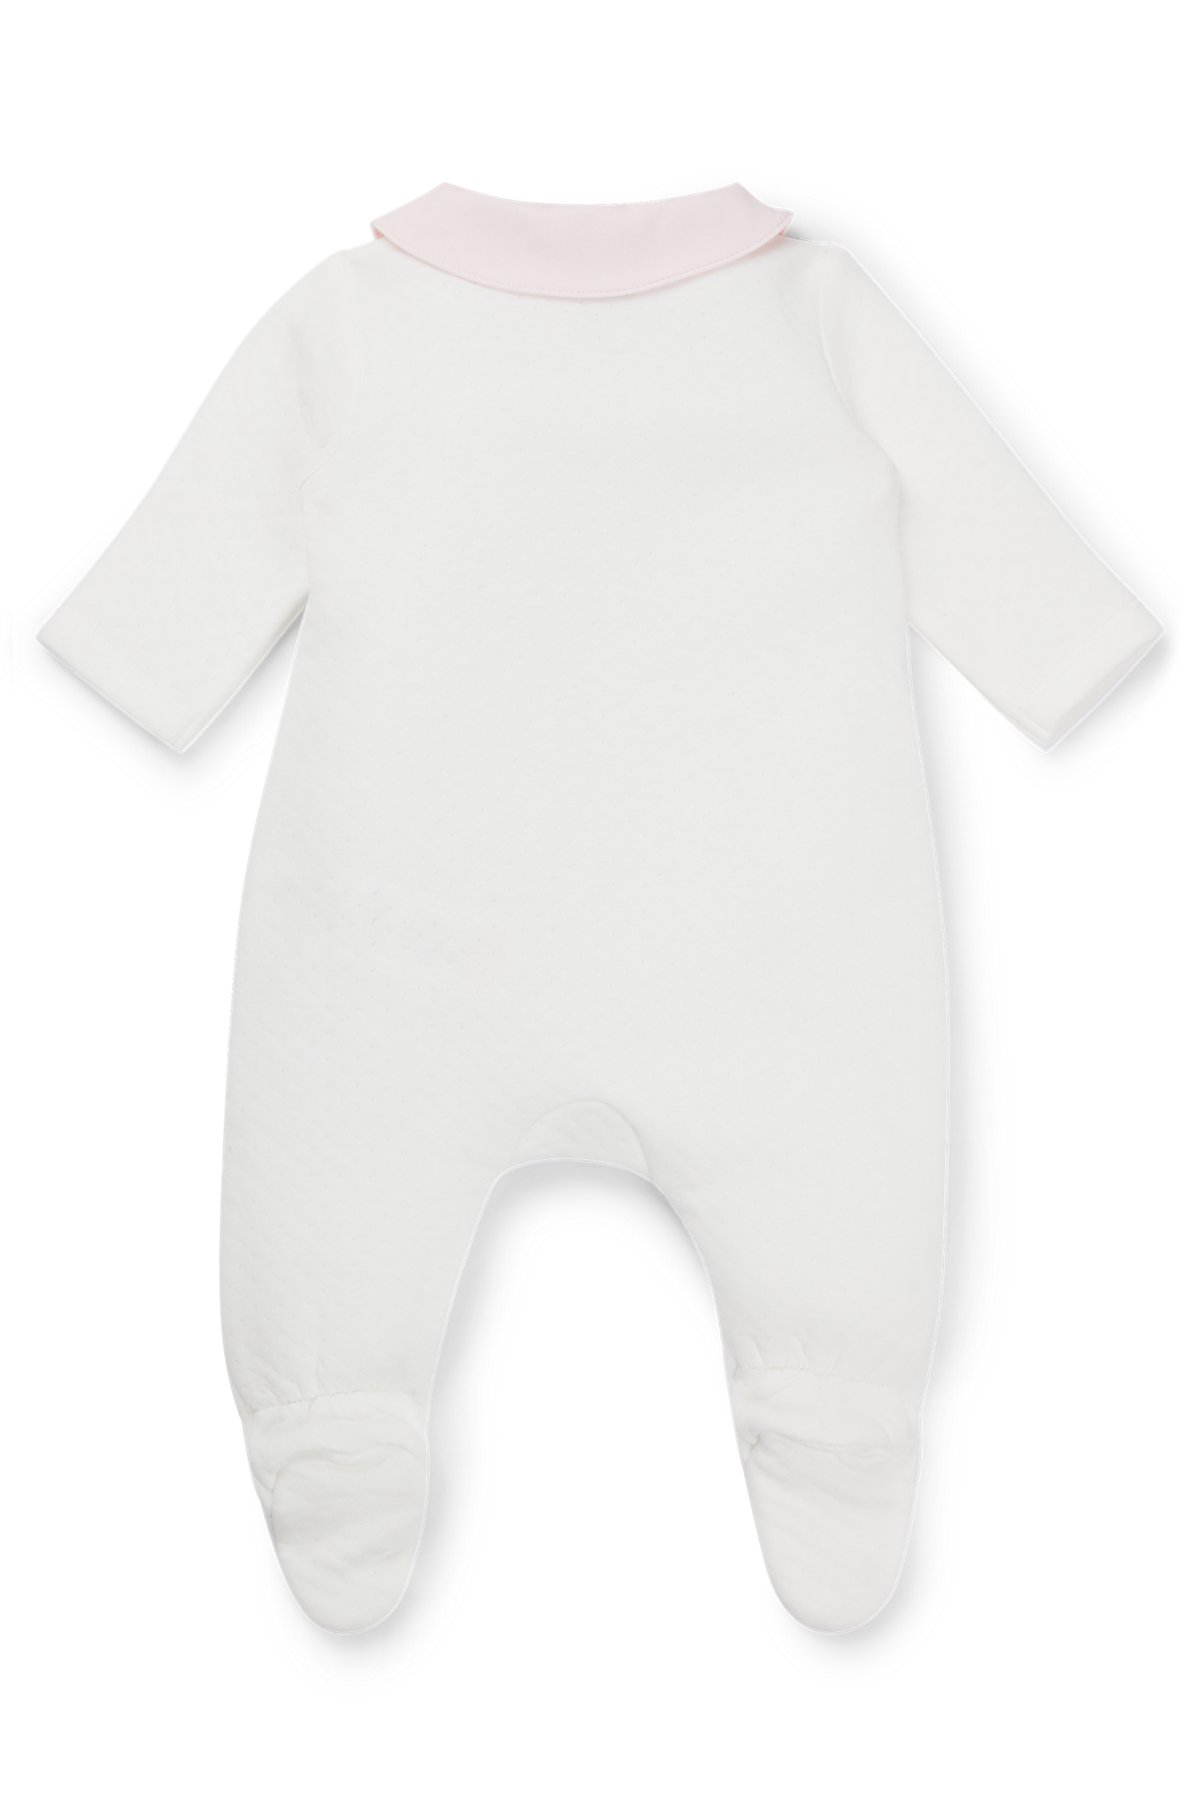 Gift-boxed sleepsuit and headband for babies, White